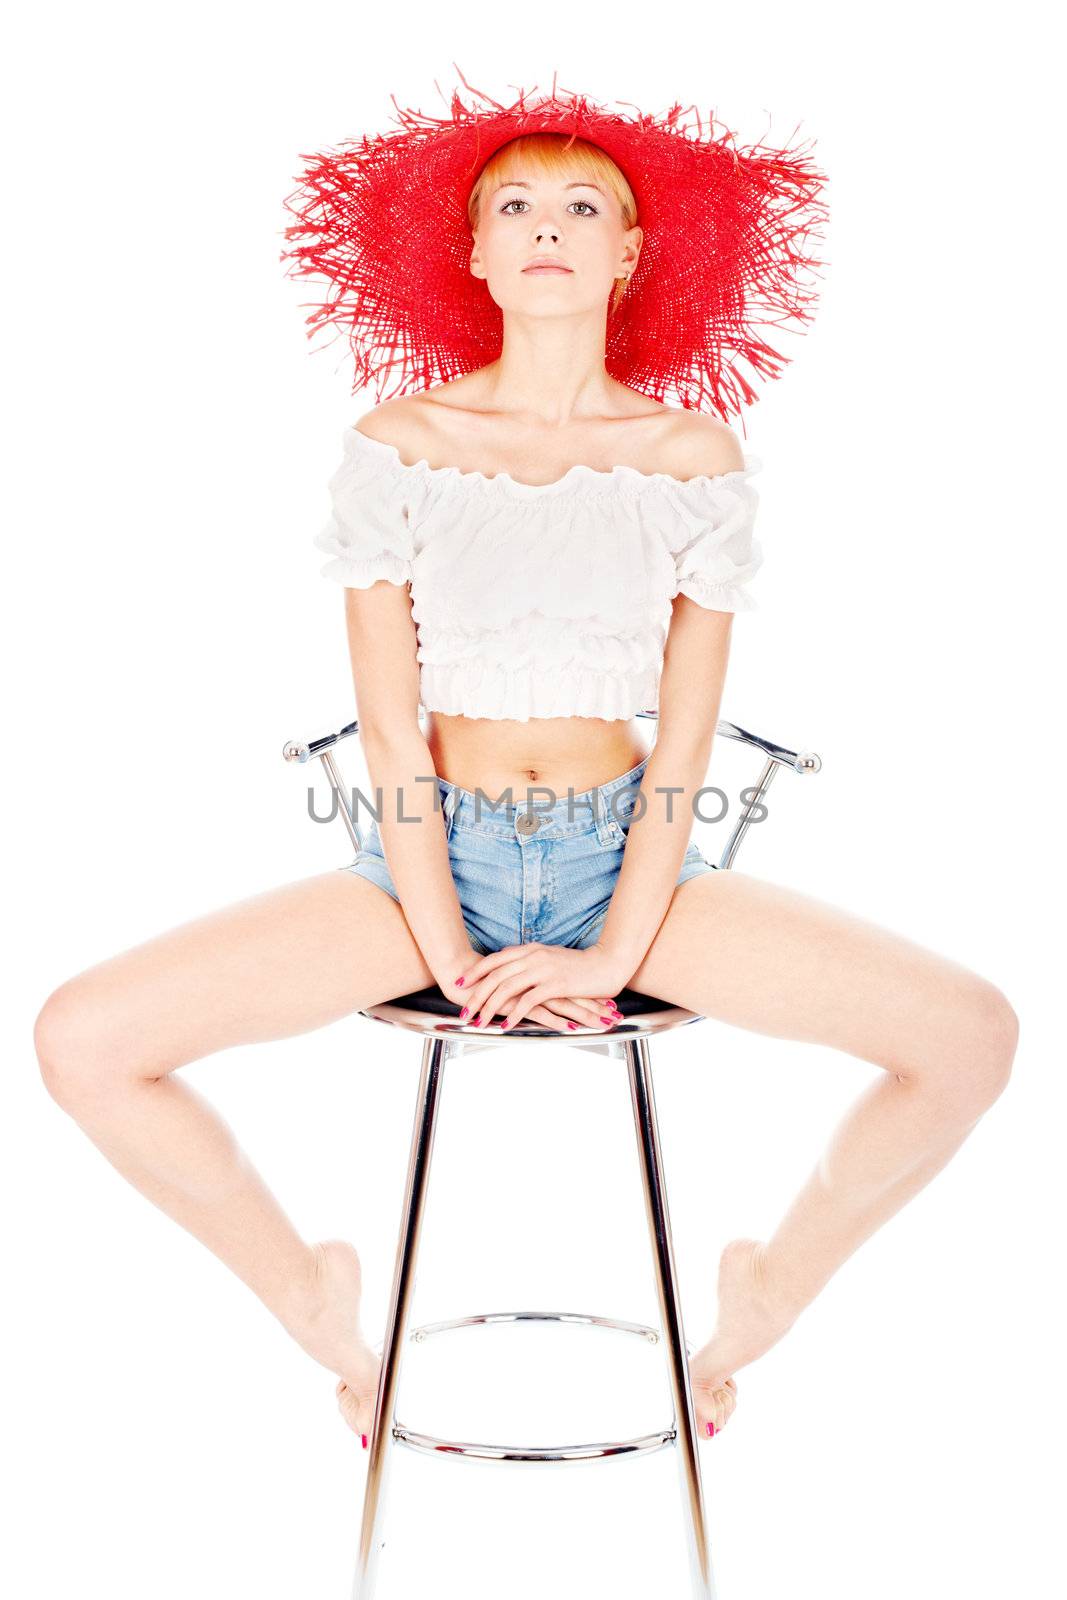 Woman with red hat sitting on the chair, isolated on white